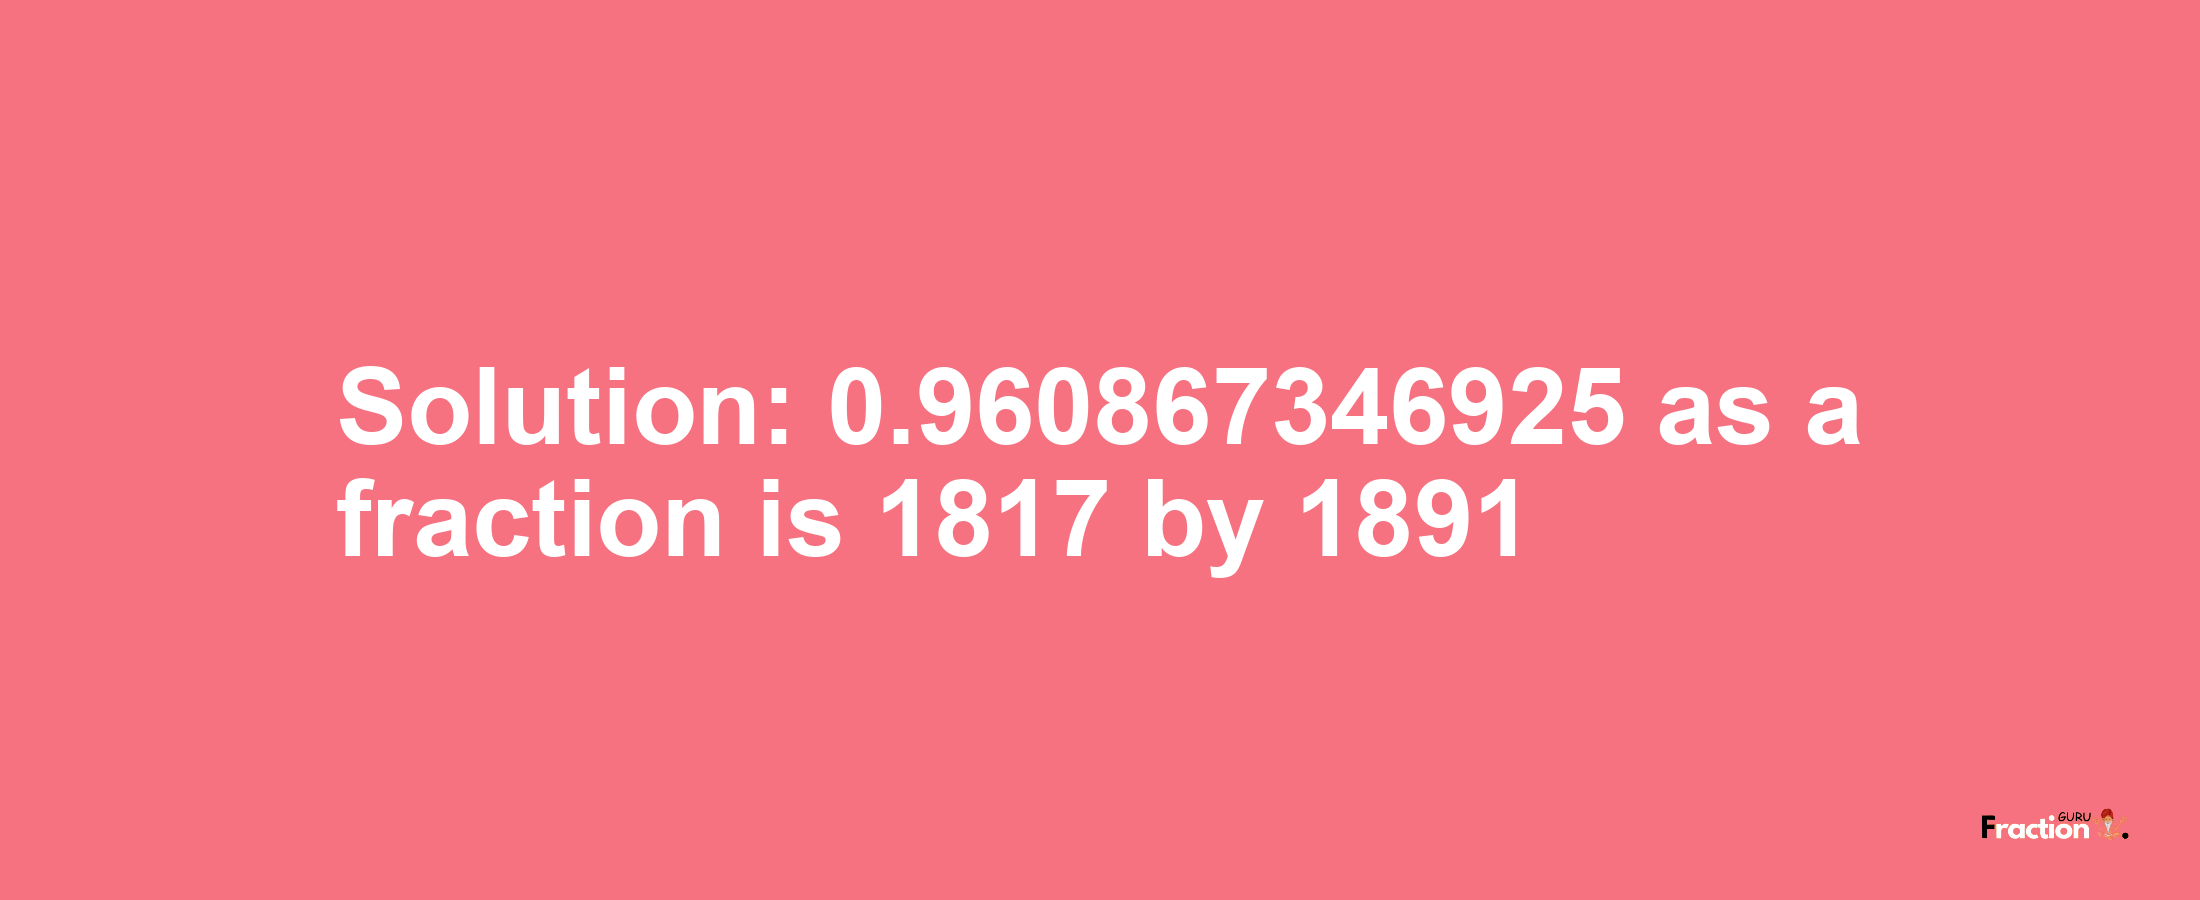 Solution:0.960867346925 as a fraction is 1817/1891